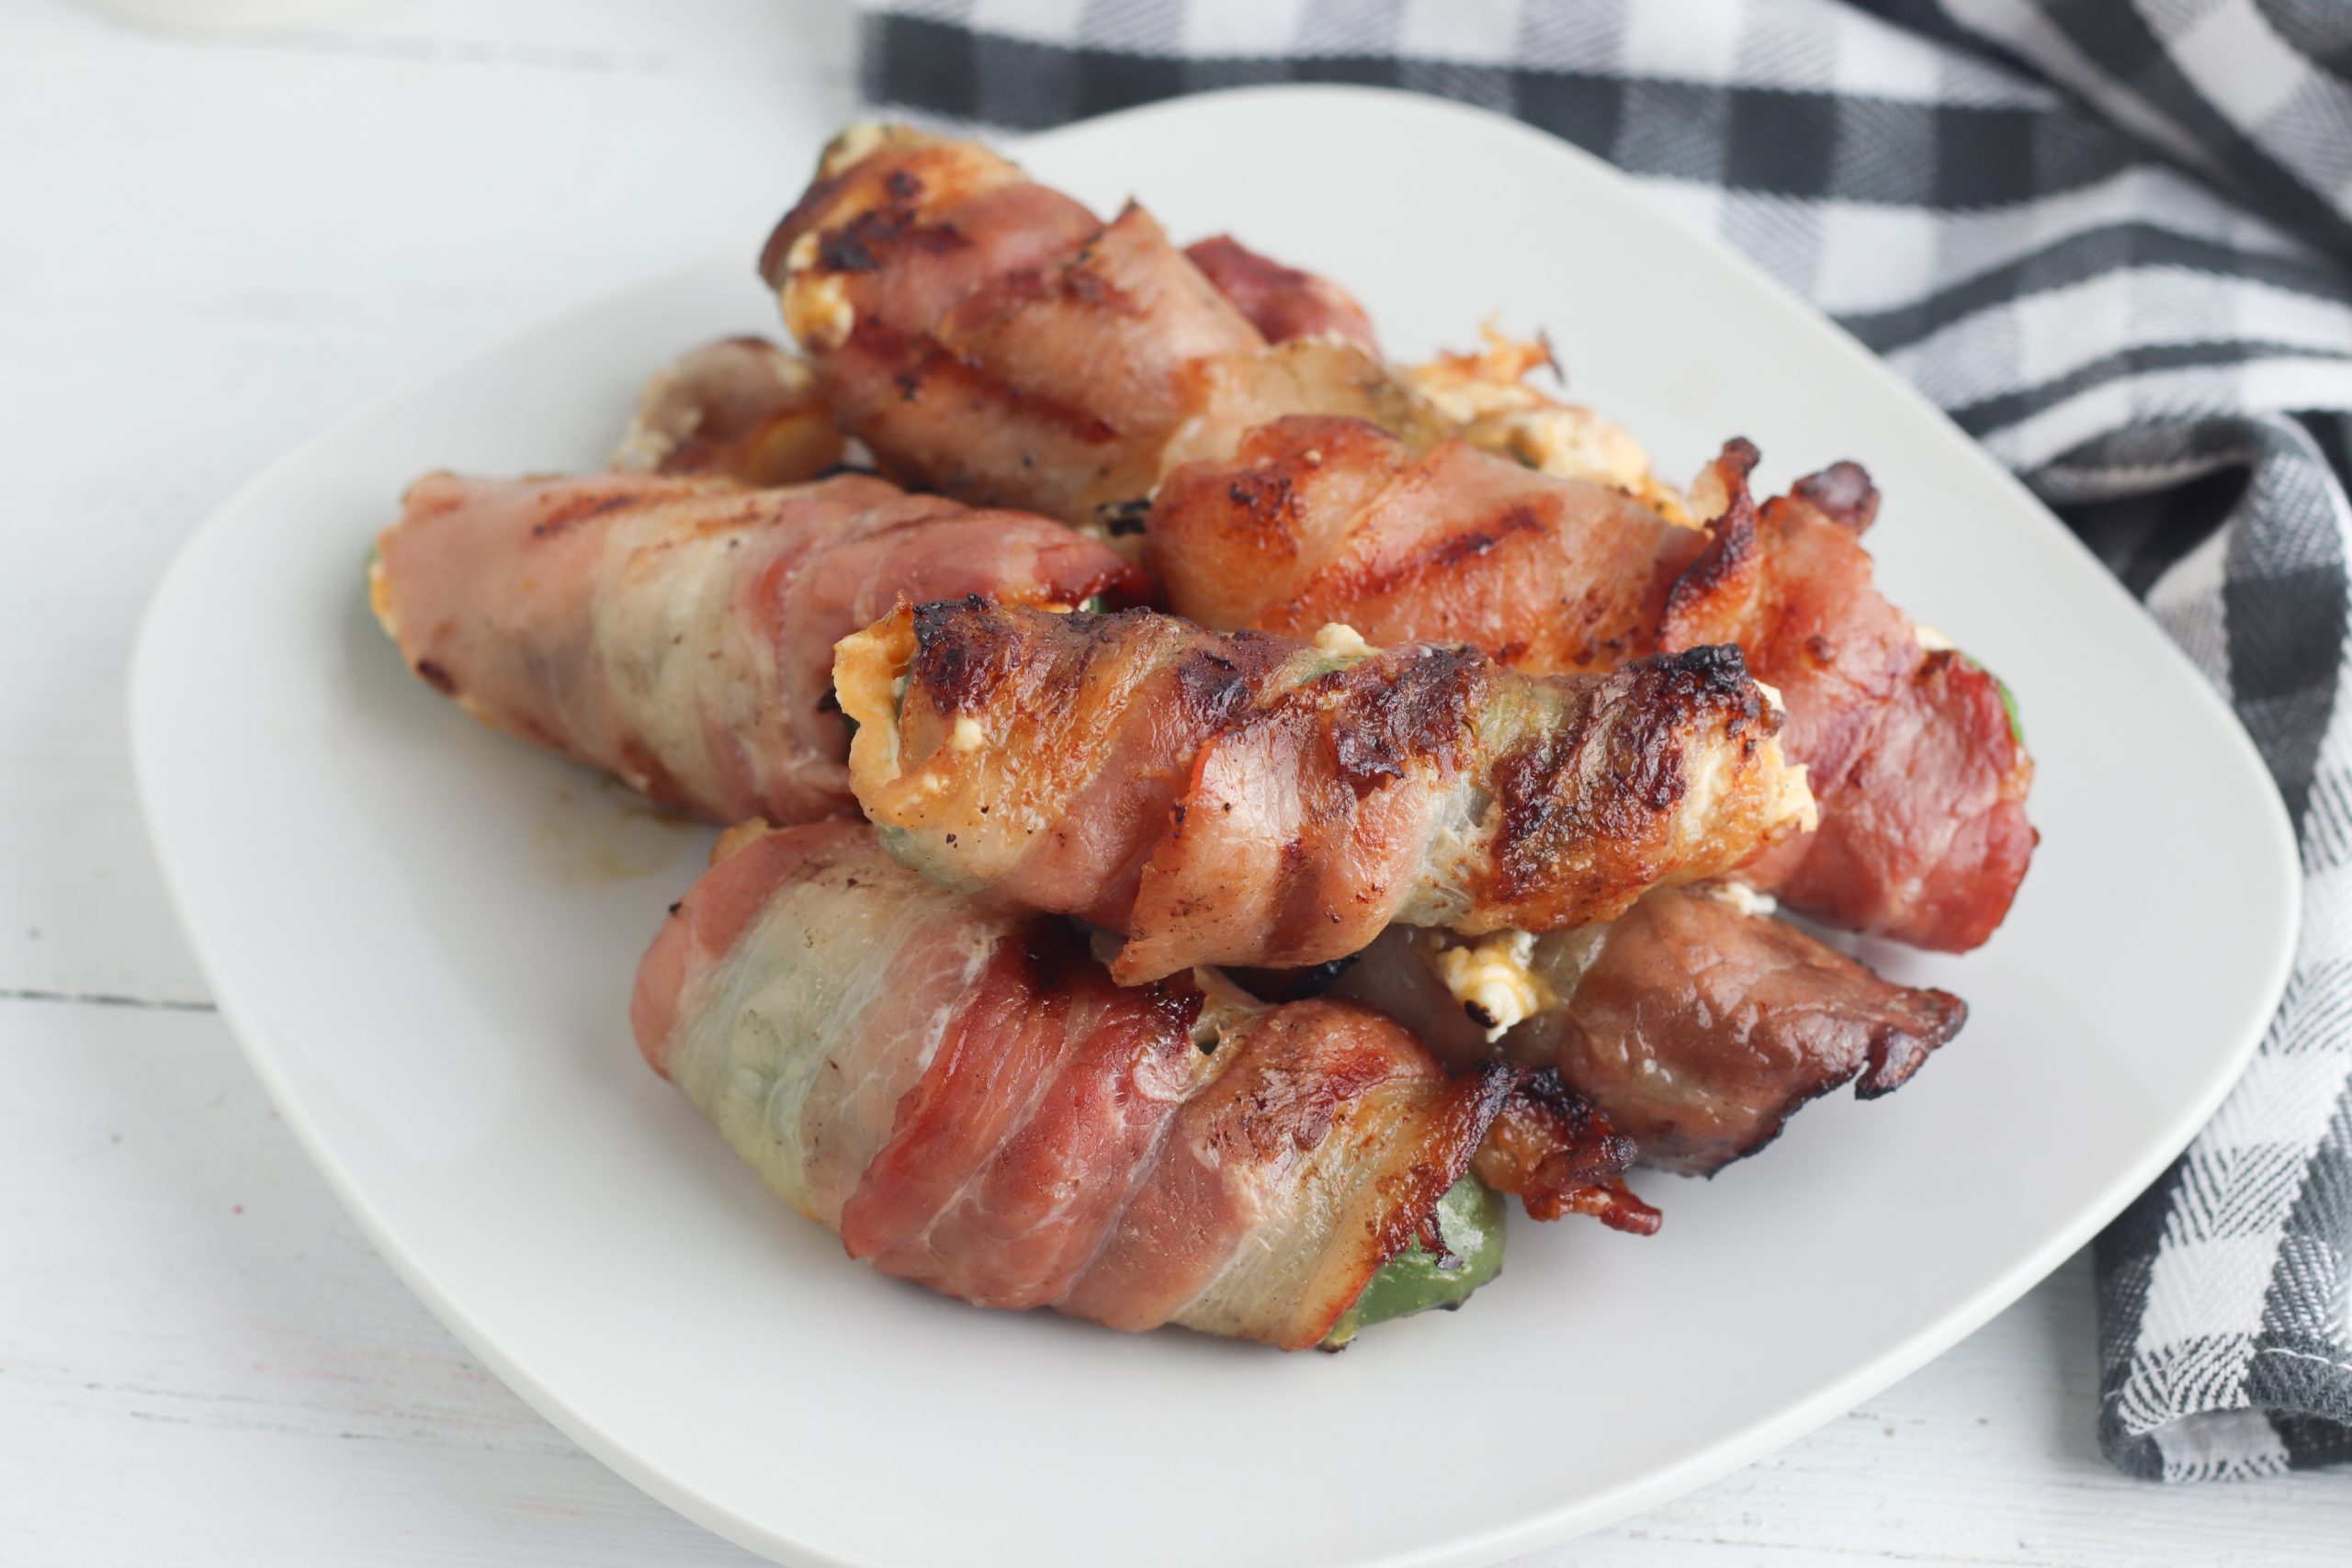 Grilled Jalapeno Poppers are wrapped in bacon and grilled to crispy perfection. Cheesy and spicy, they make an awesome appetizer. 